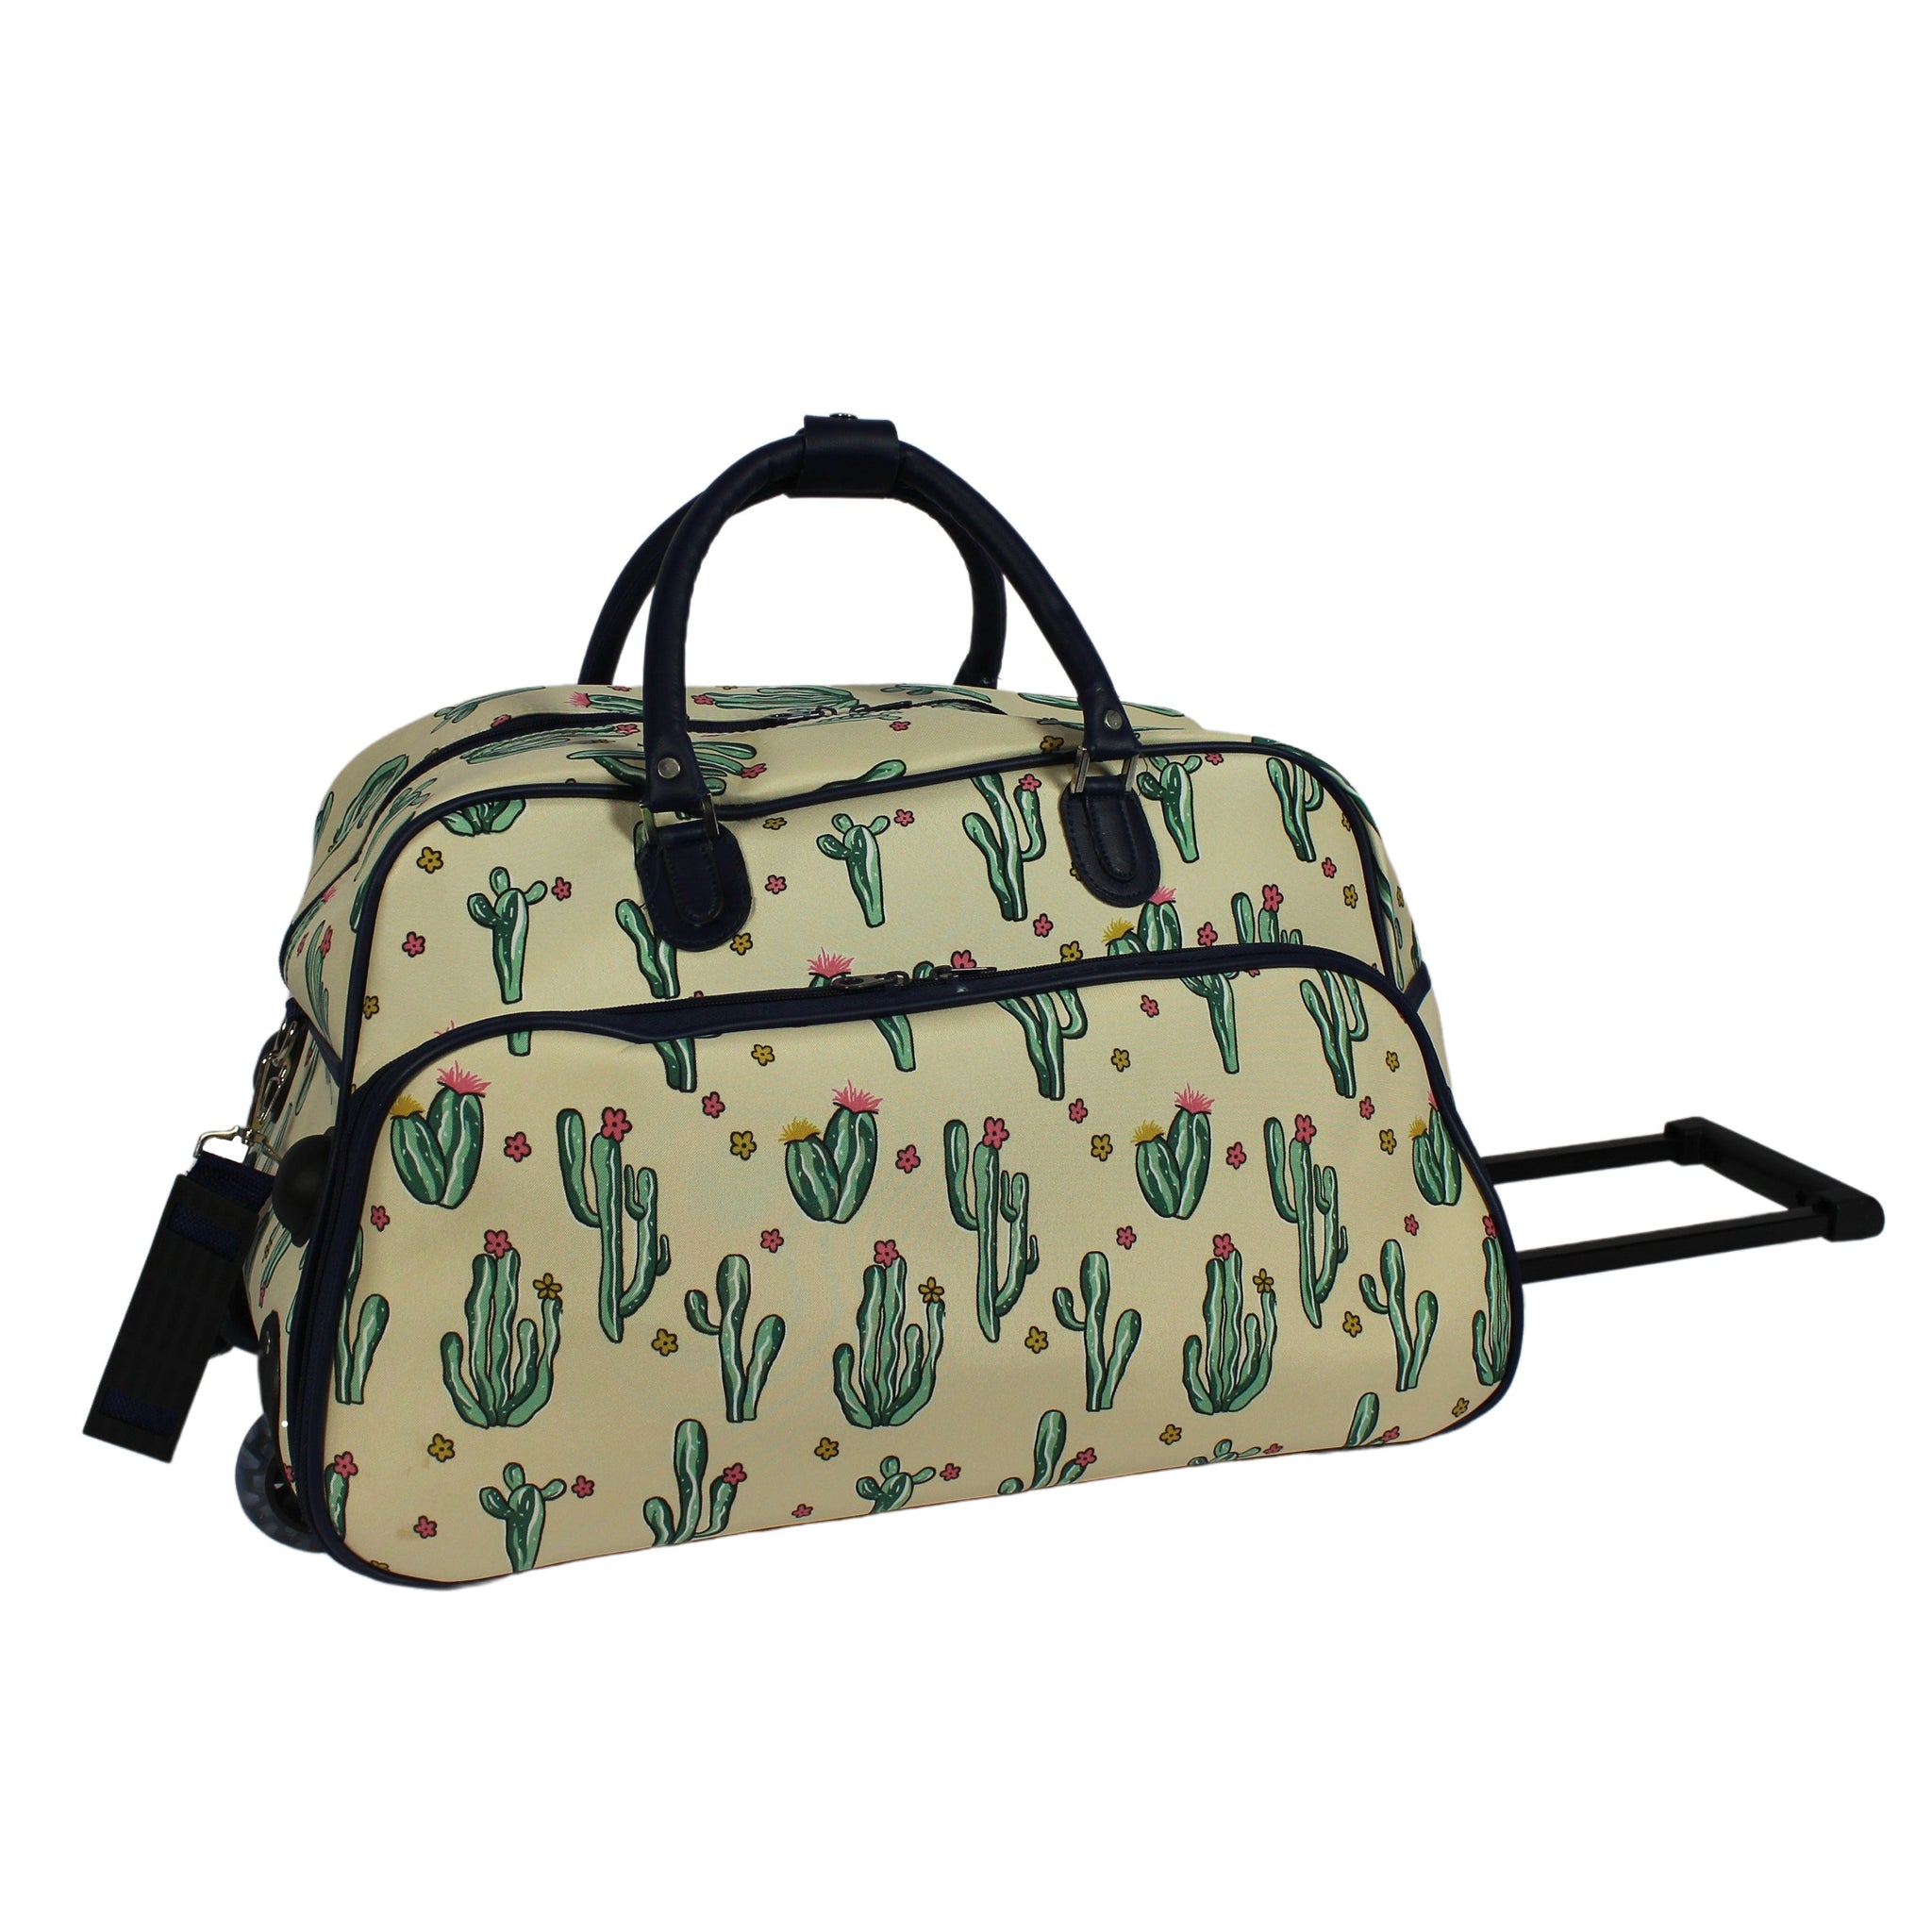 CalBags 21" Rolling Carry-On Duffel Bag - Cactus